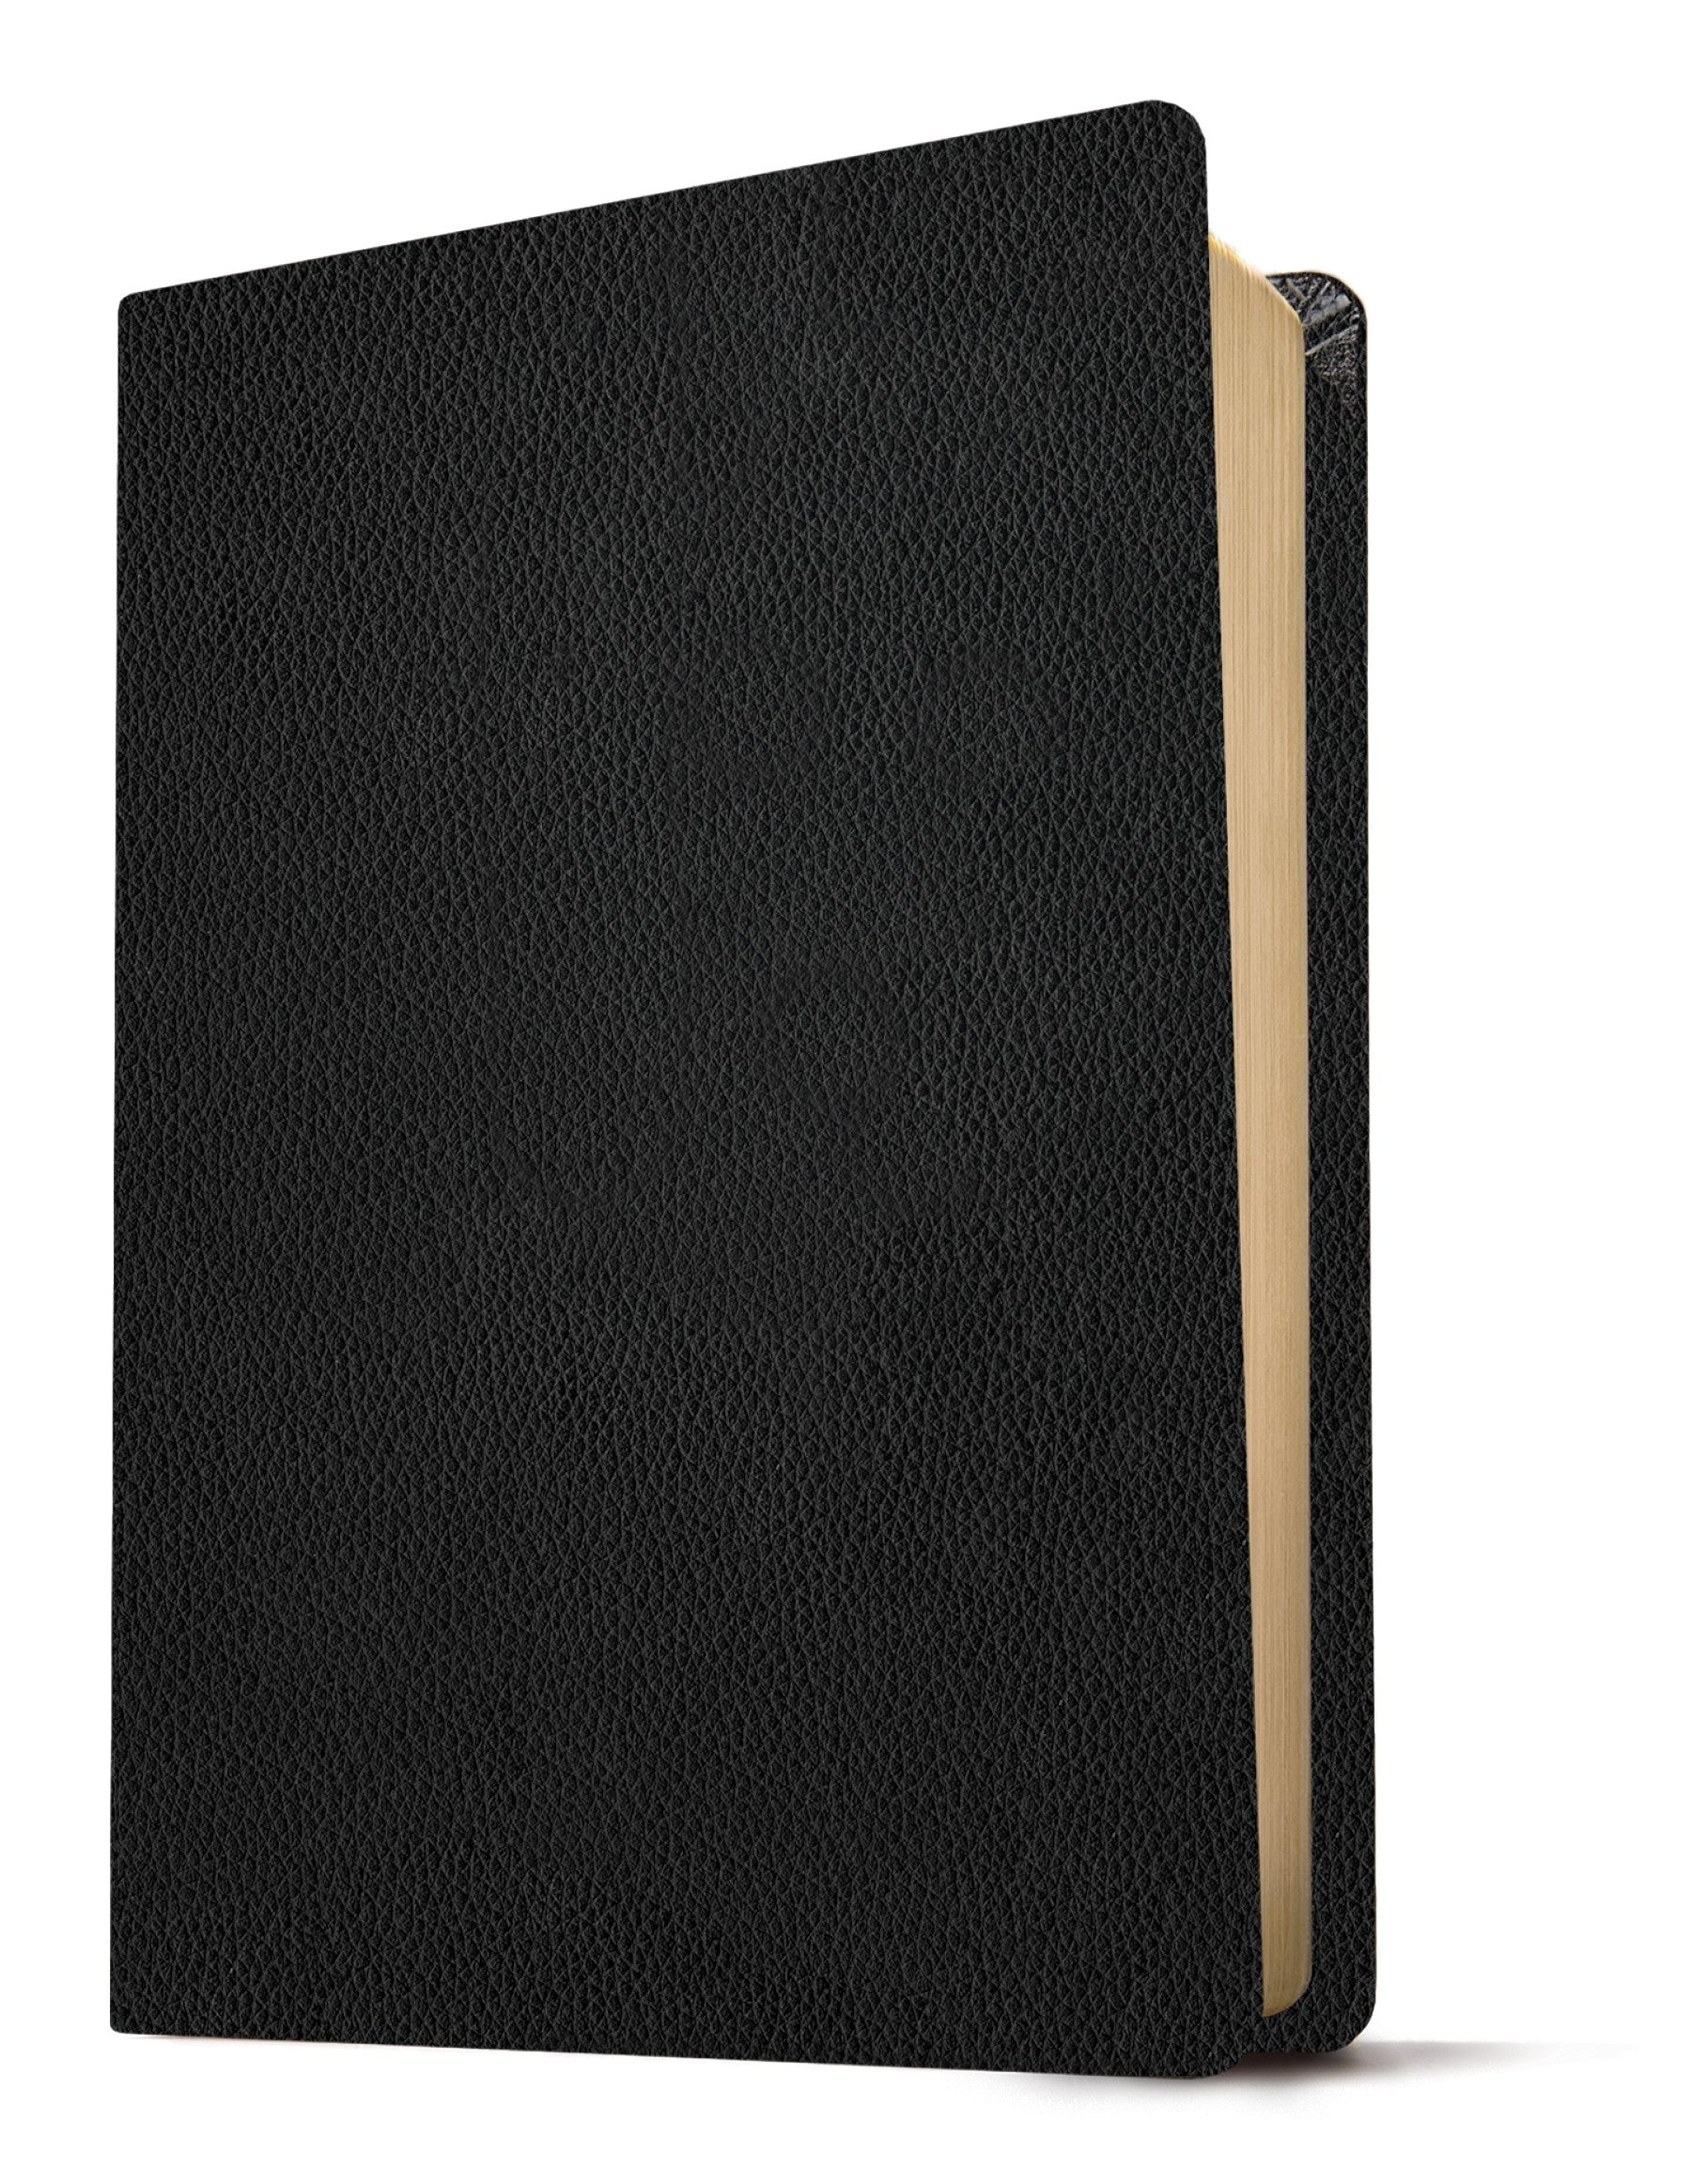 Image of NLT Personal Size Giant Print Bible, Black, Genuine Leather, Filament Enabled Edition other